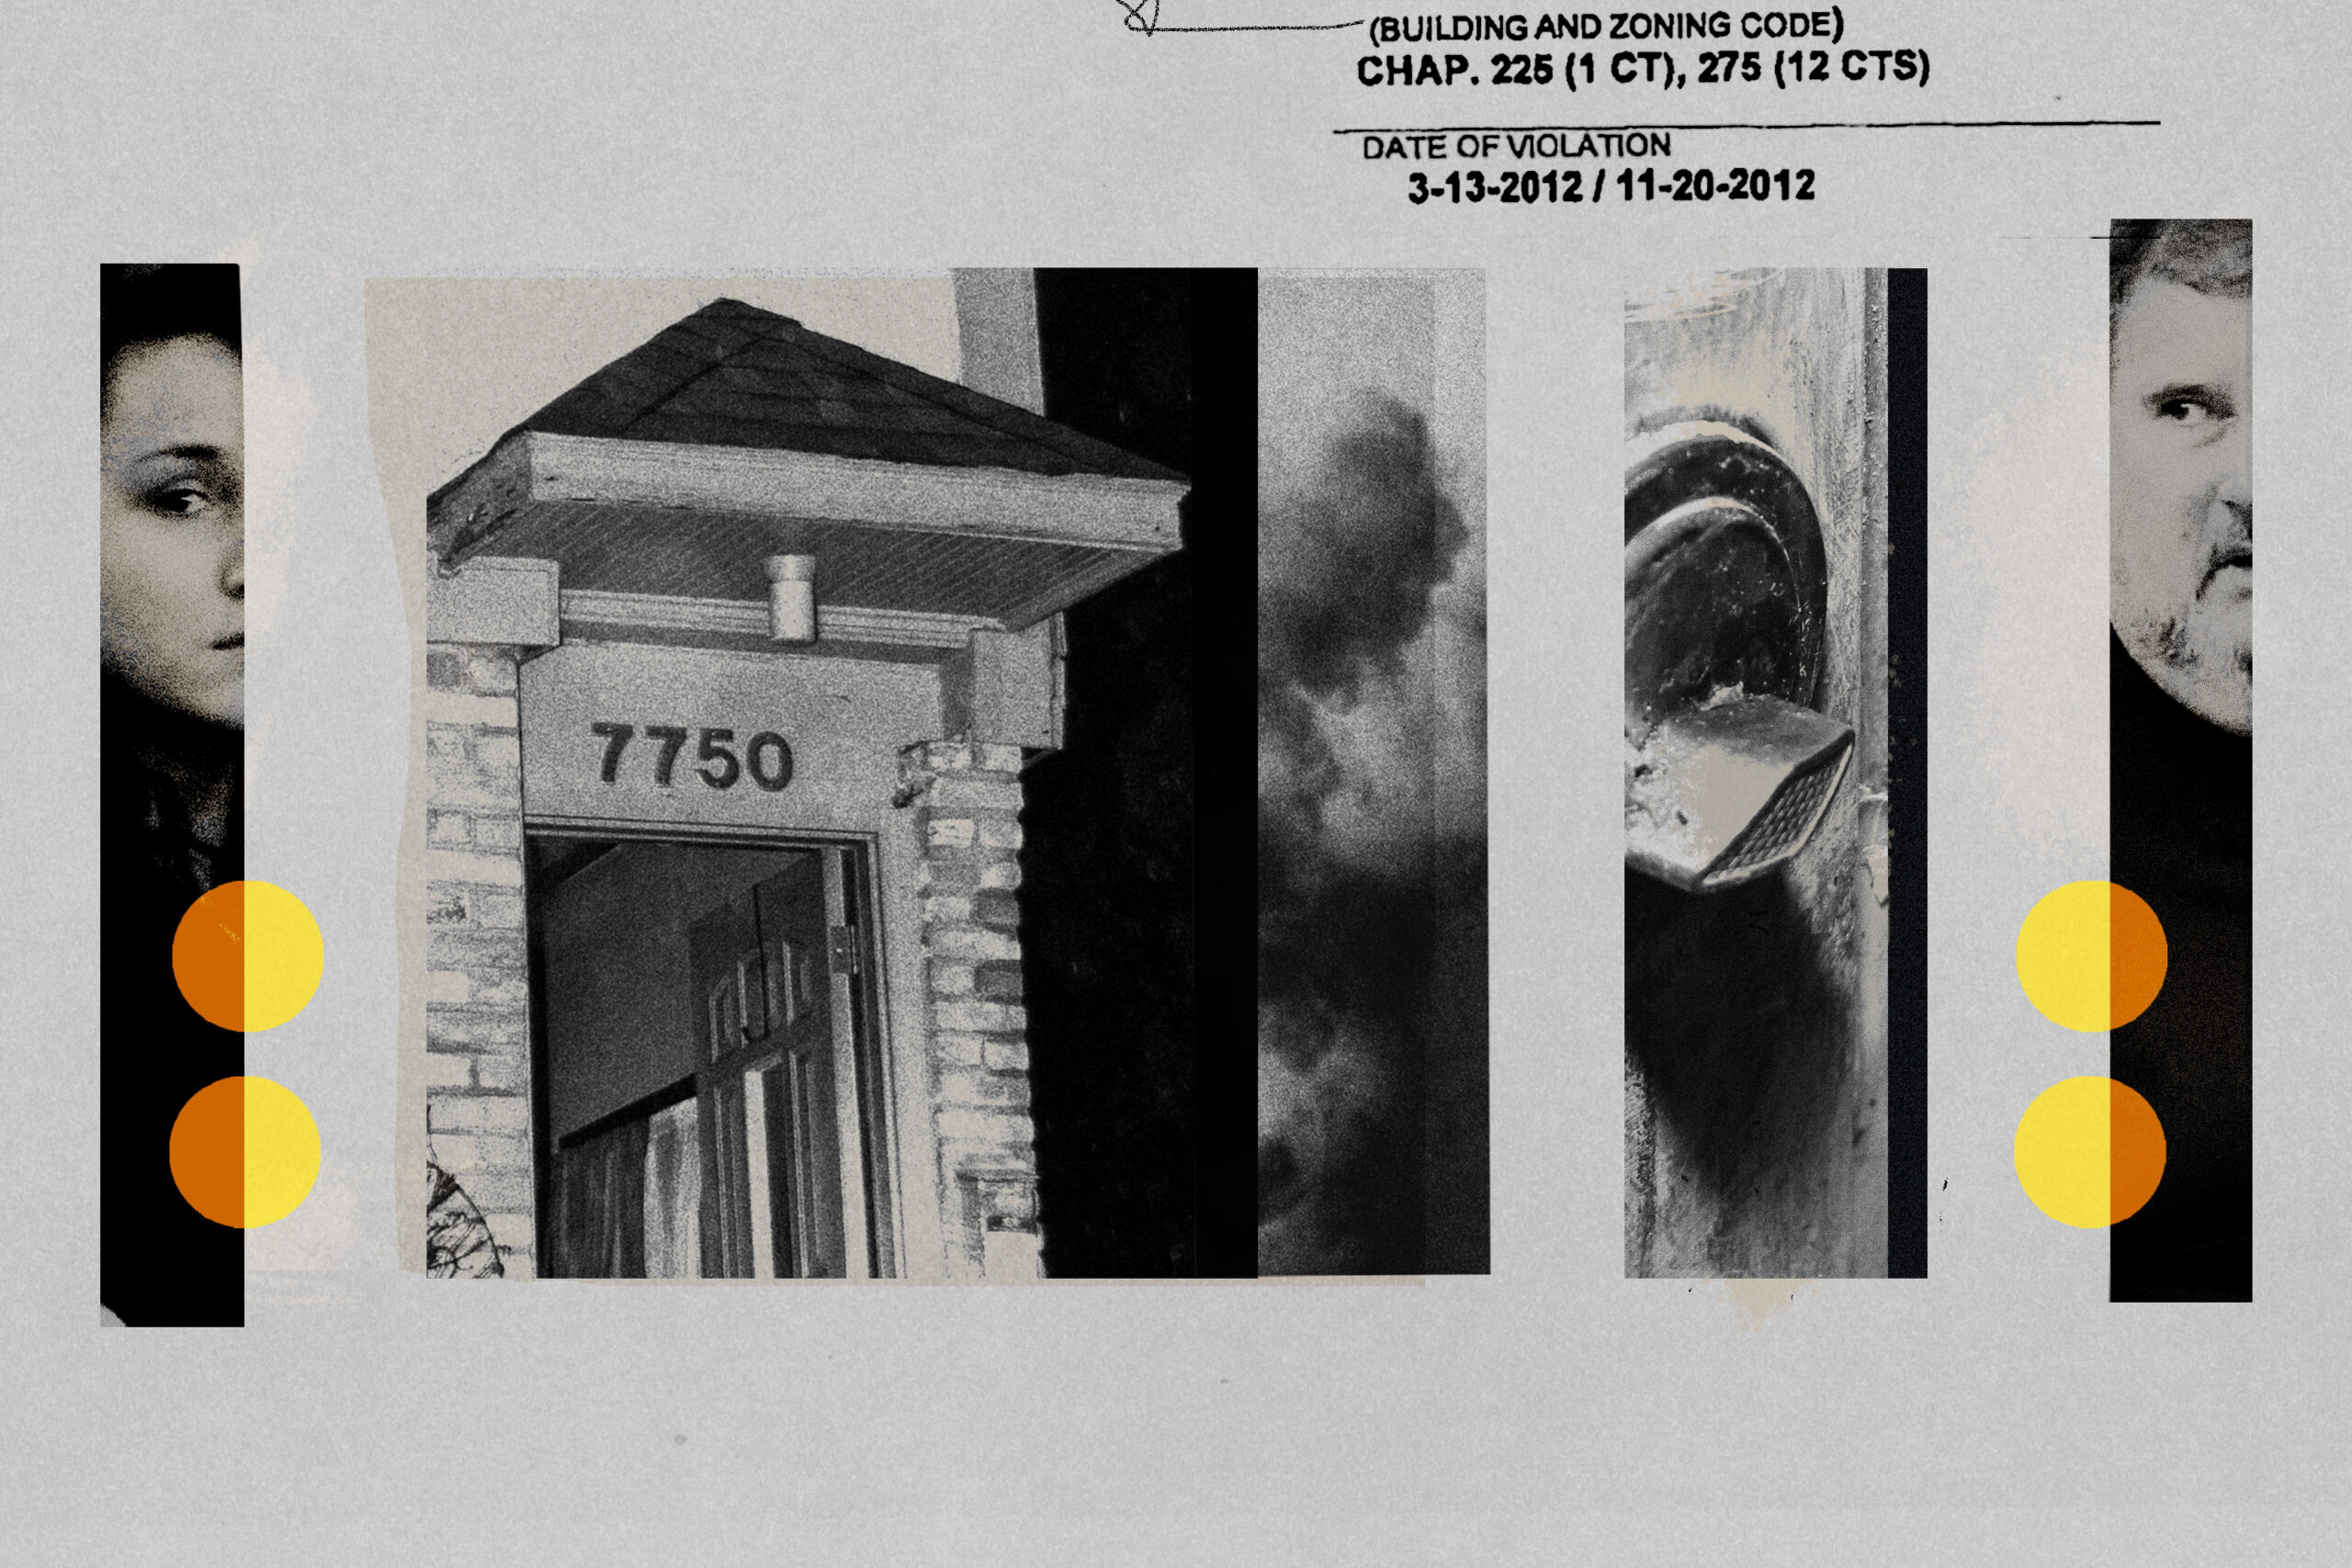 A graphic shows a mix of images including a woman's face, a man's face, a doorway, smoke and a door lock. The montage is the main art used for the report "The Landlord and the Tenant" by the Milwaukee Journal Sentinel and ProPublica